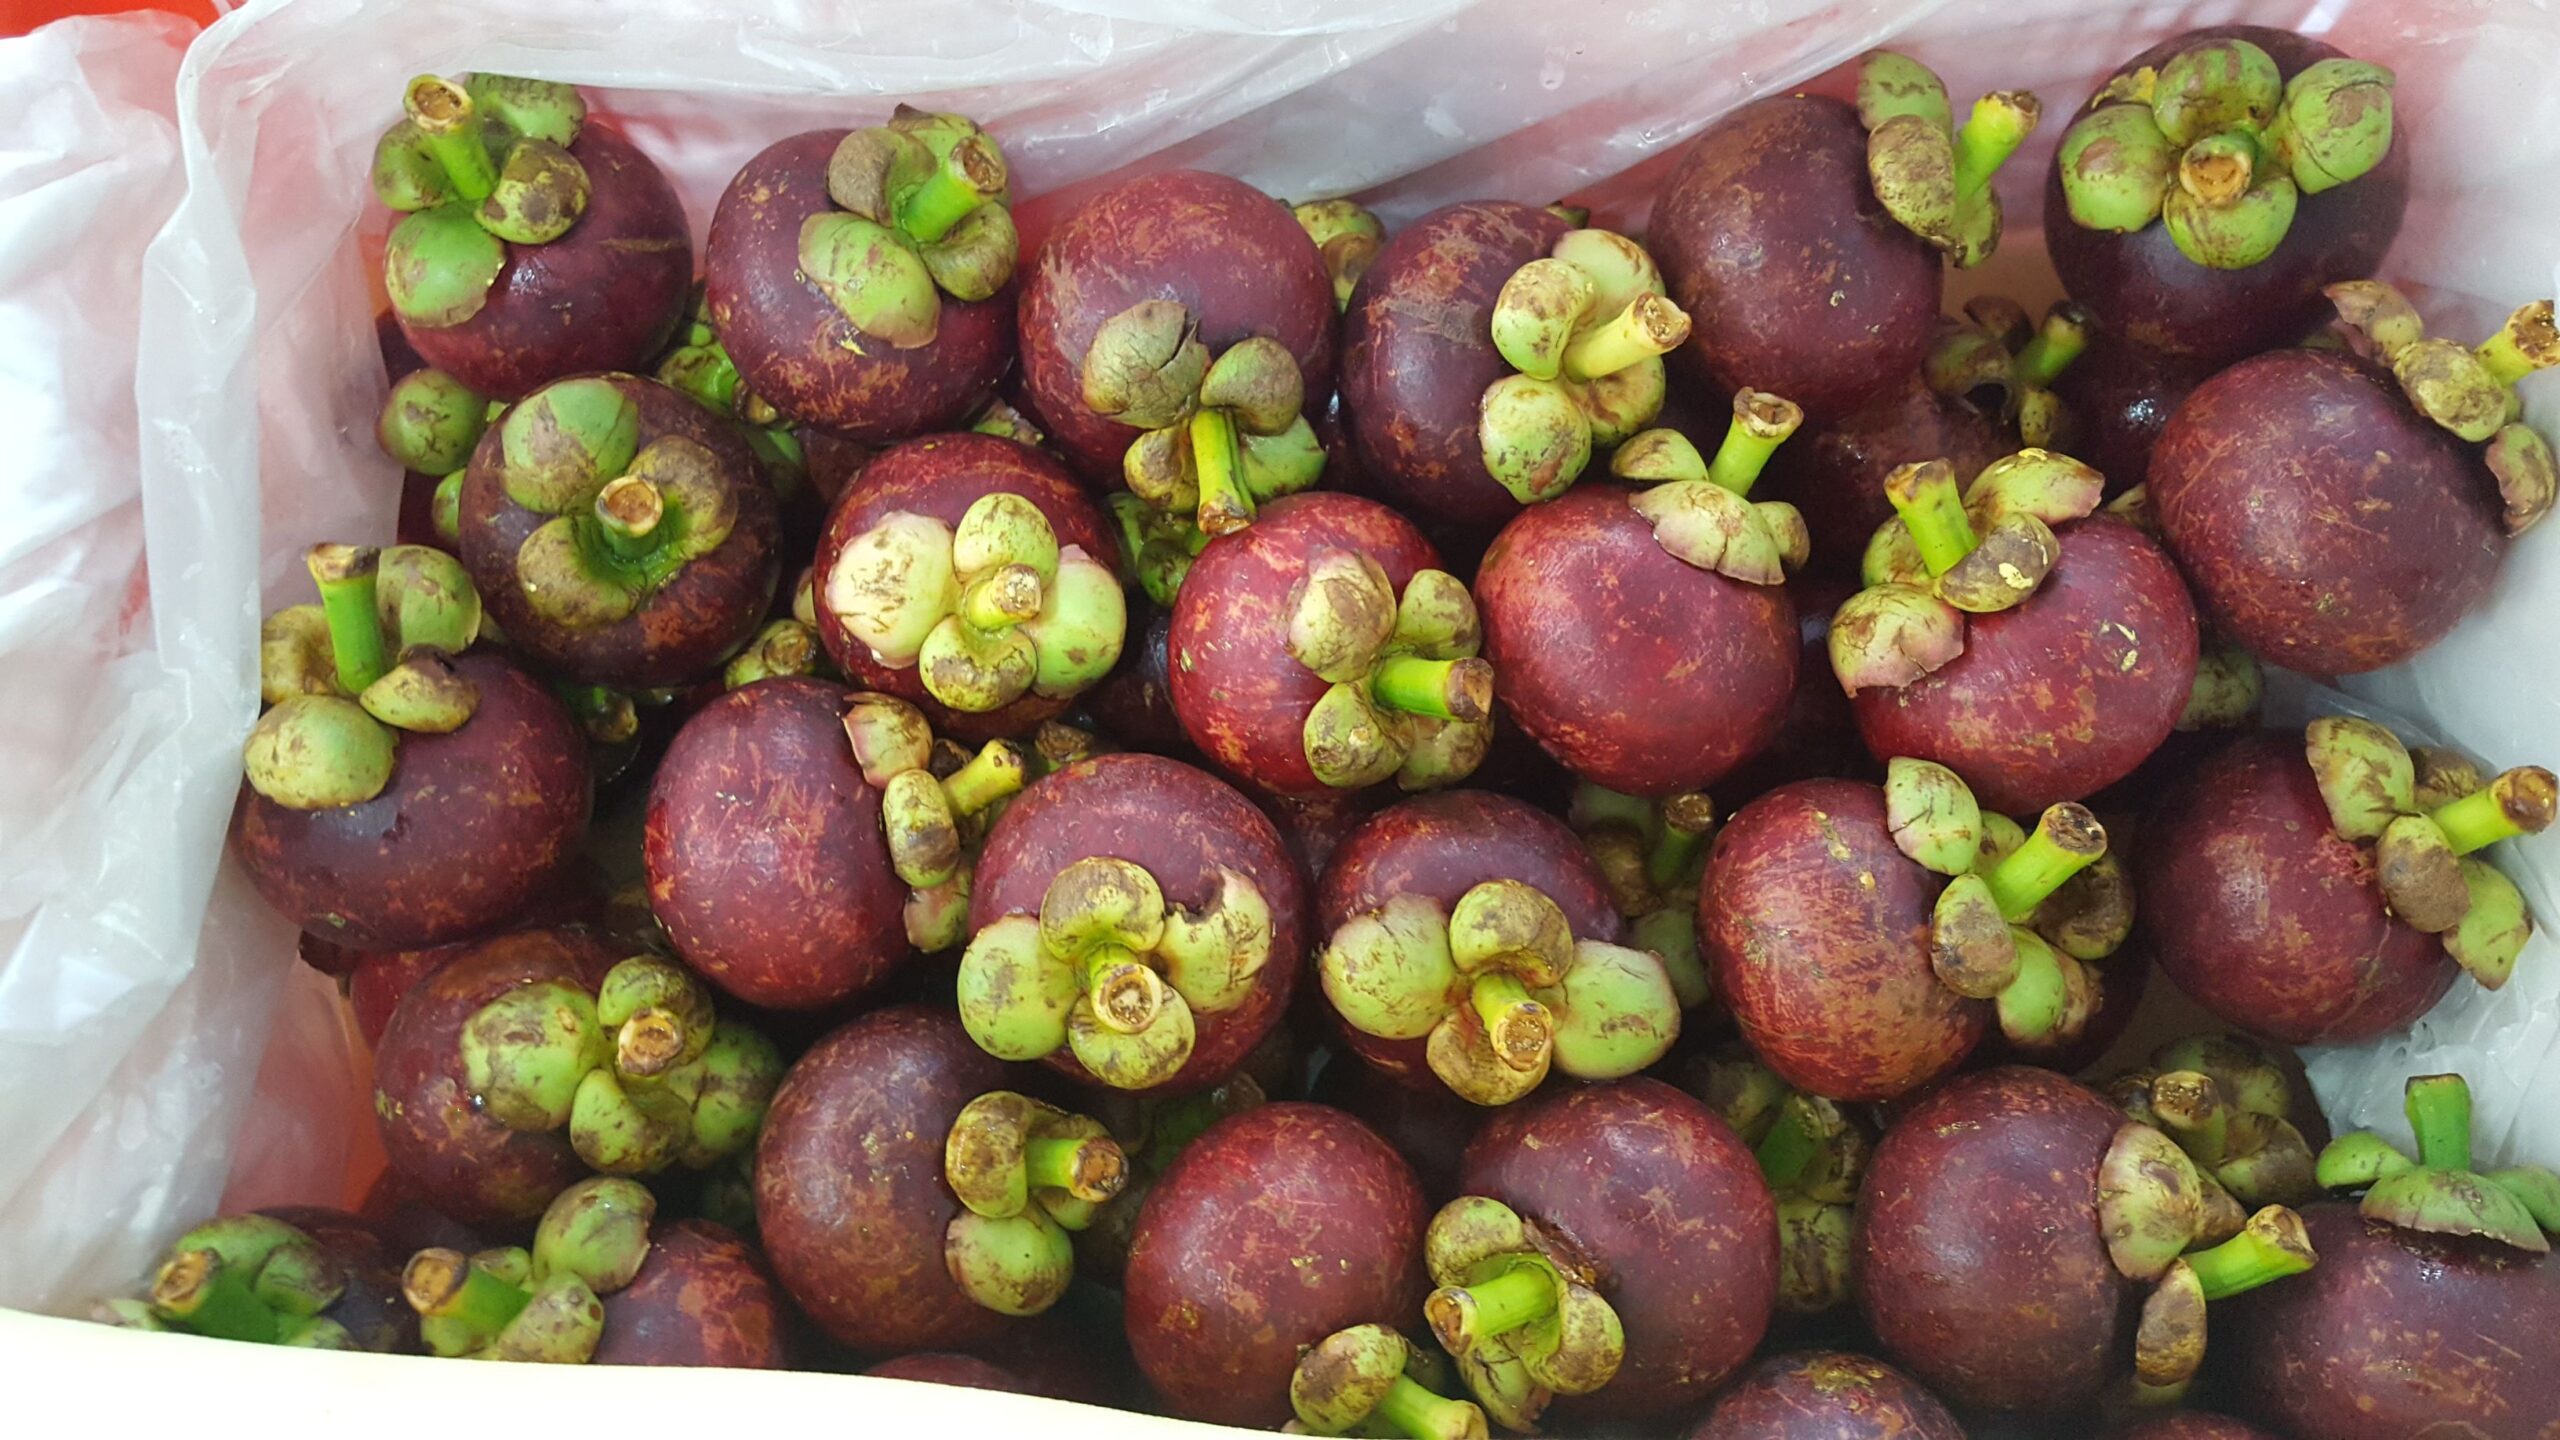 fresh best mangosteen export packing from indonesia country